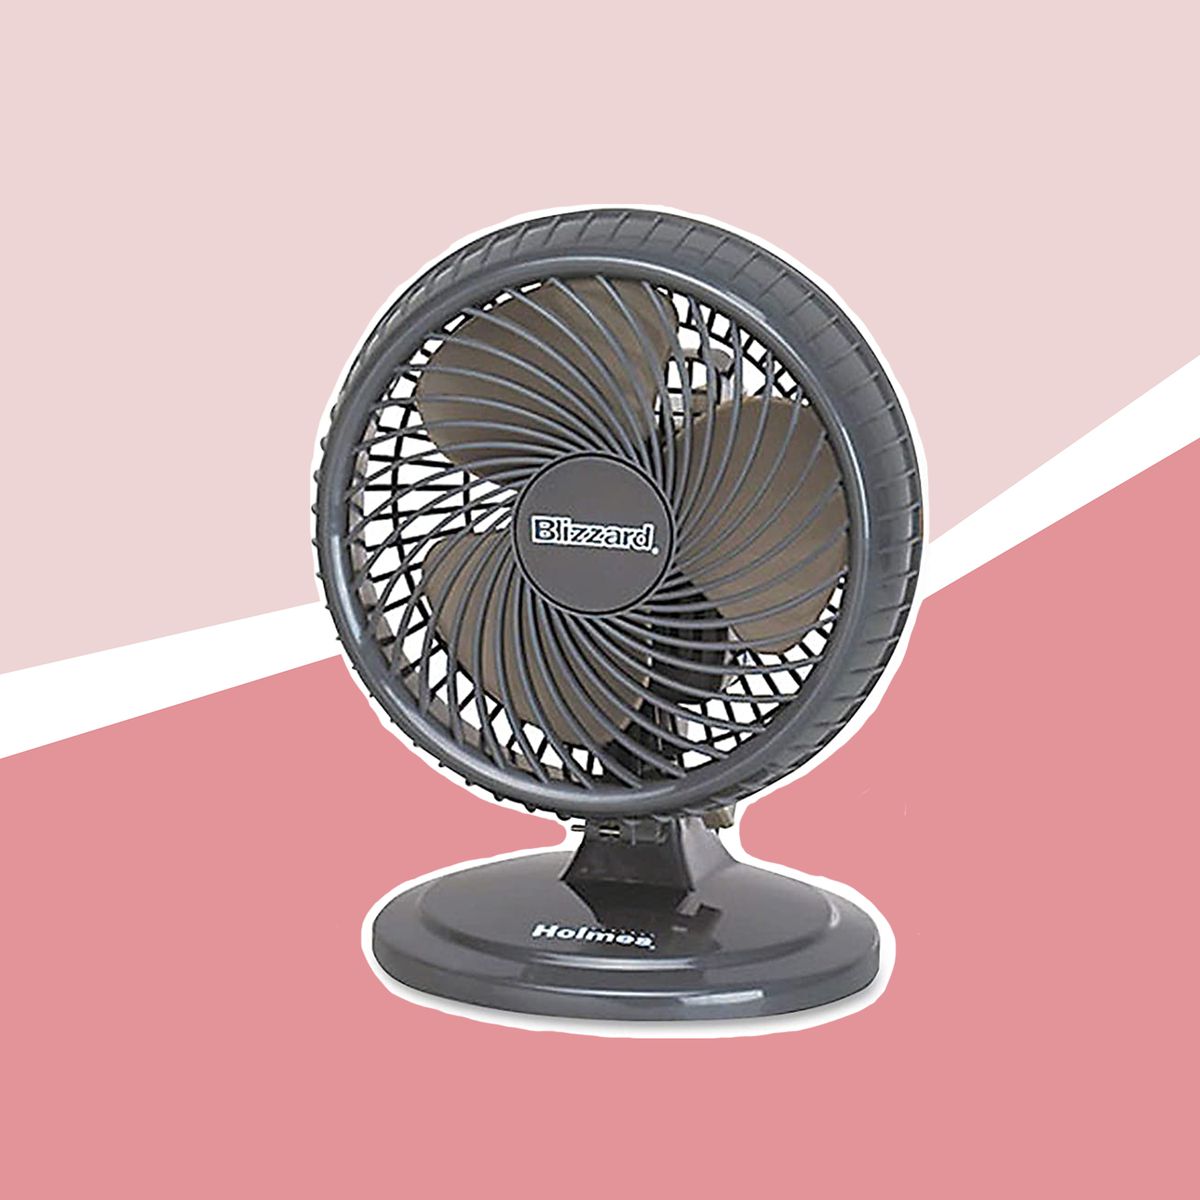 Over 1,800 Shoppers Are Obsessed With This Small But Mighty Fan